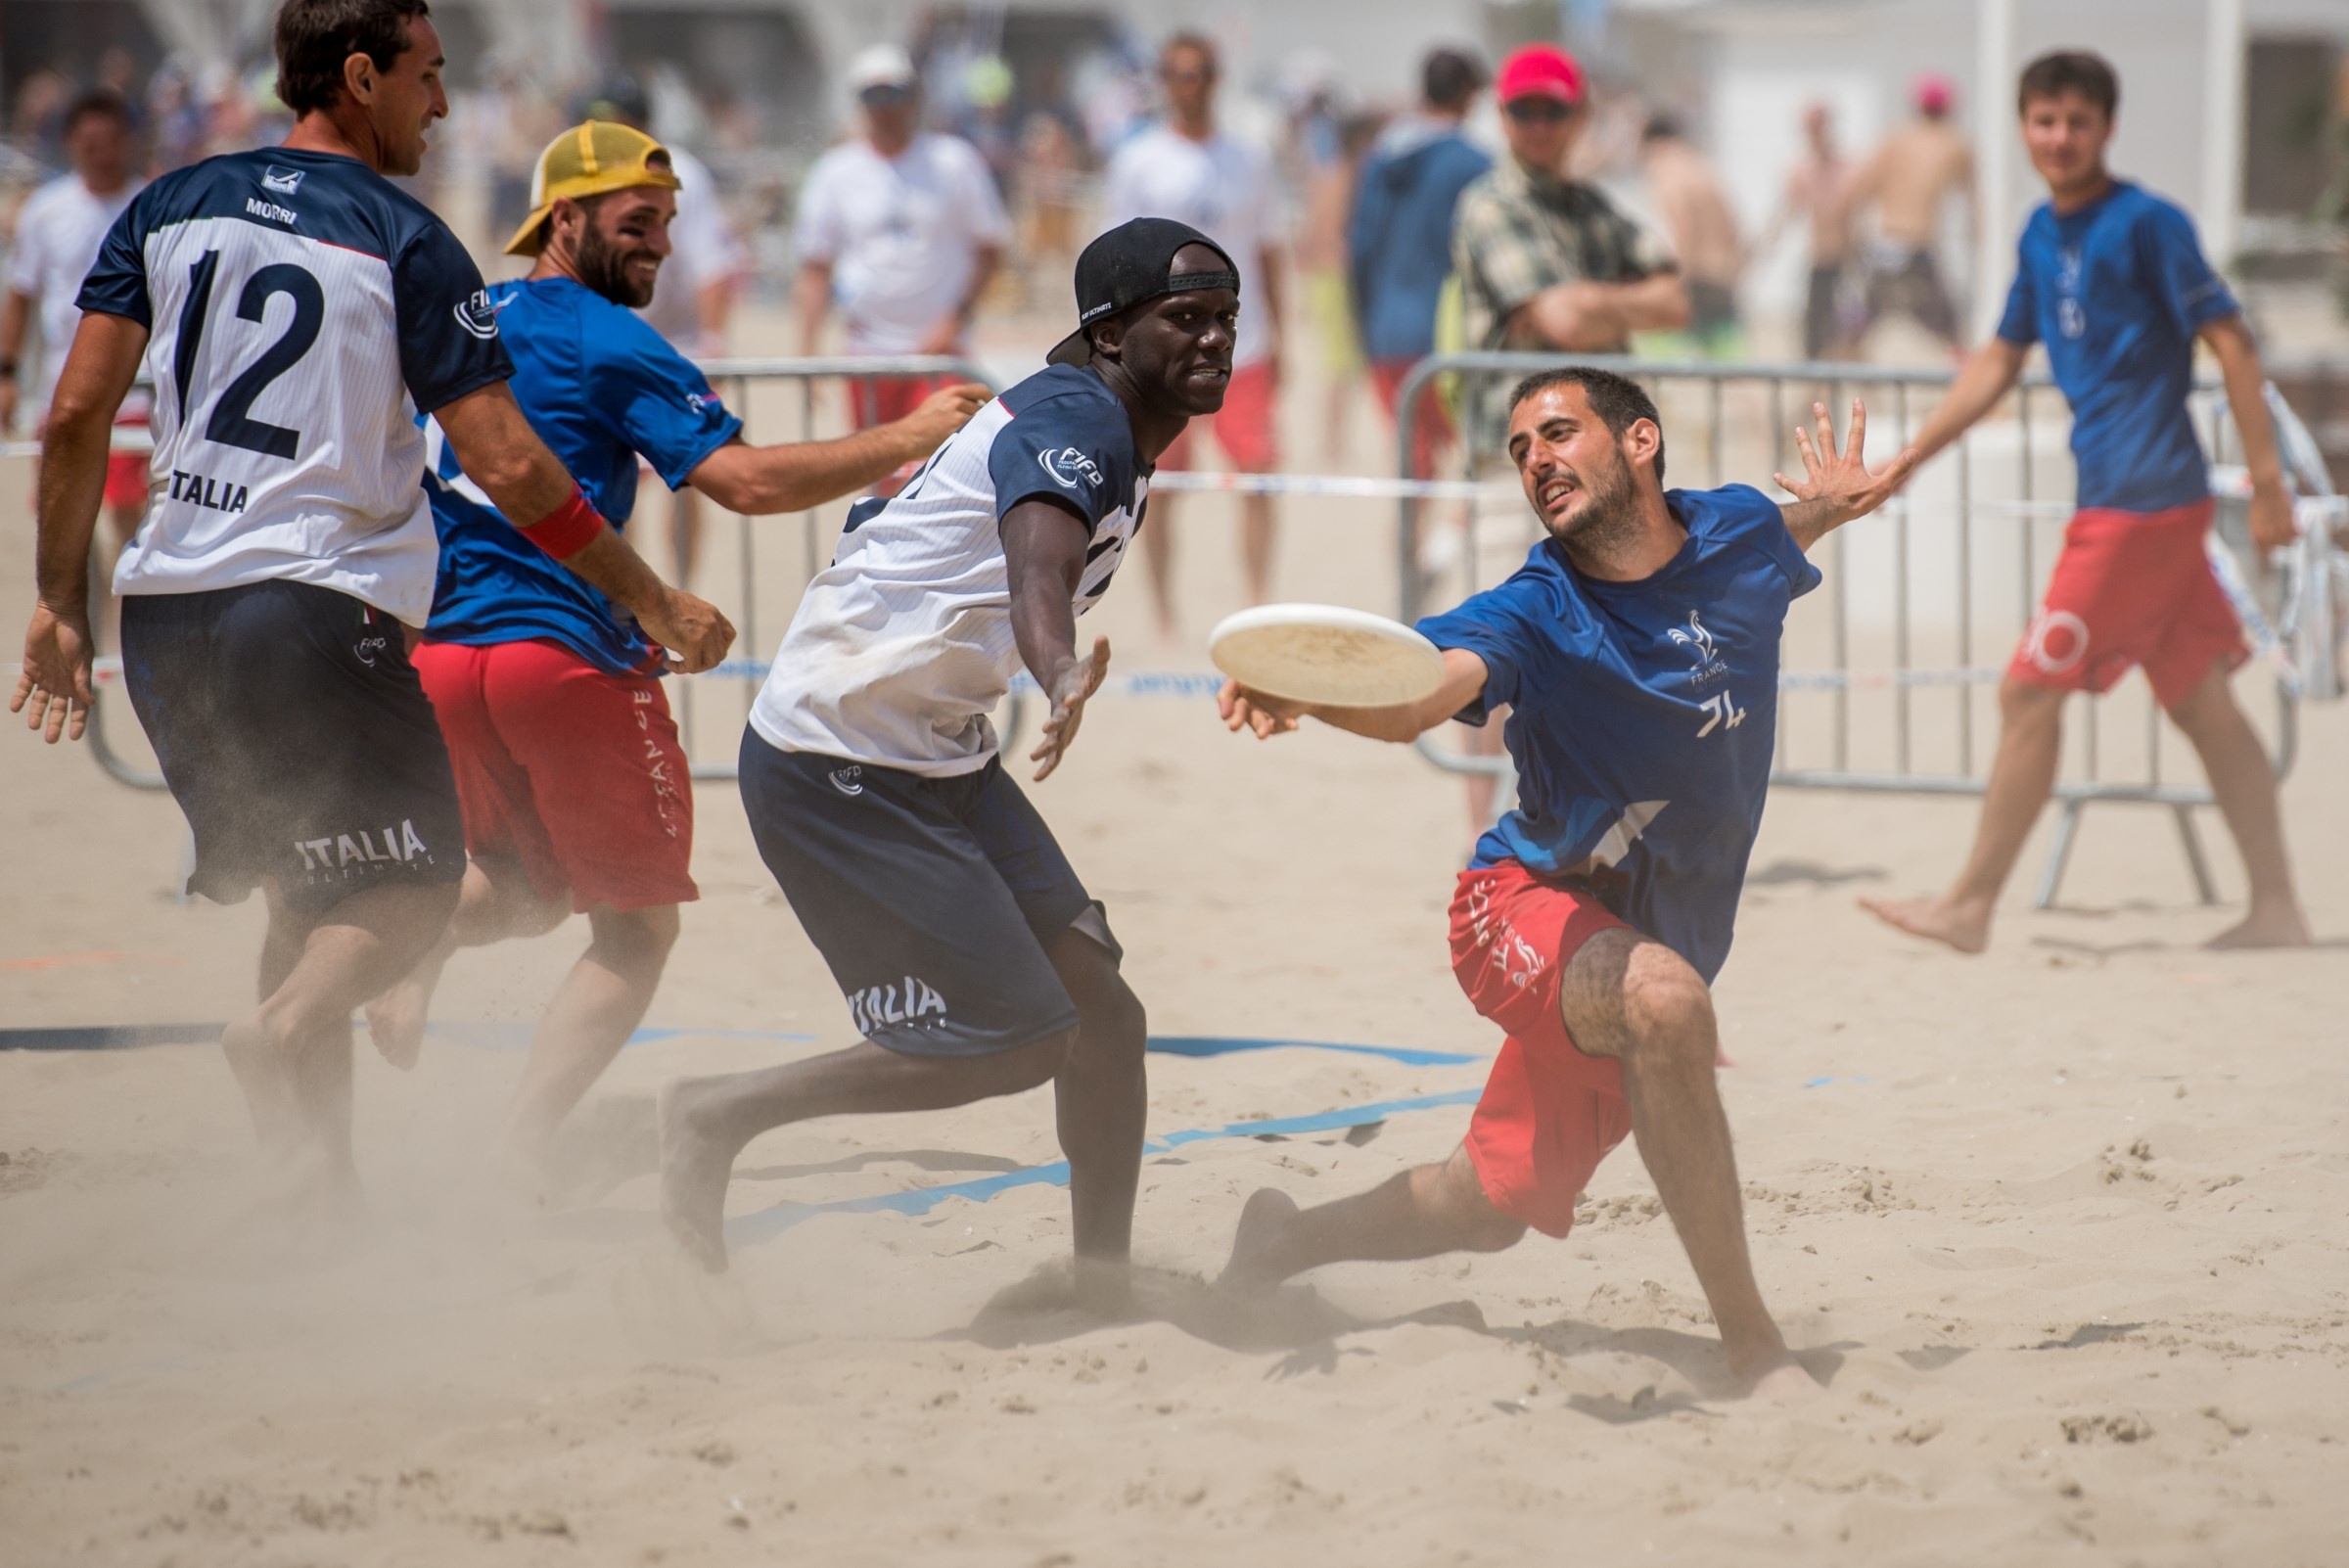 Flying Disc Sports: Sports Tournament, The European Beach Ultimate Club Championships, Beach Games, Frisbee Players of Italian National Team. 2400x1610 HD Background.